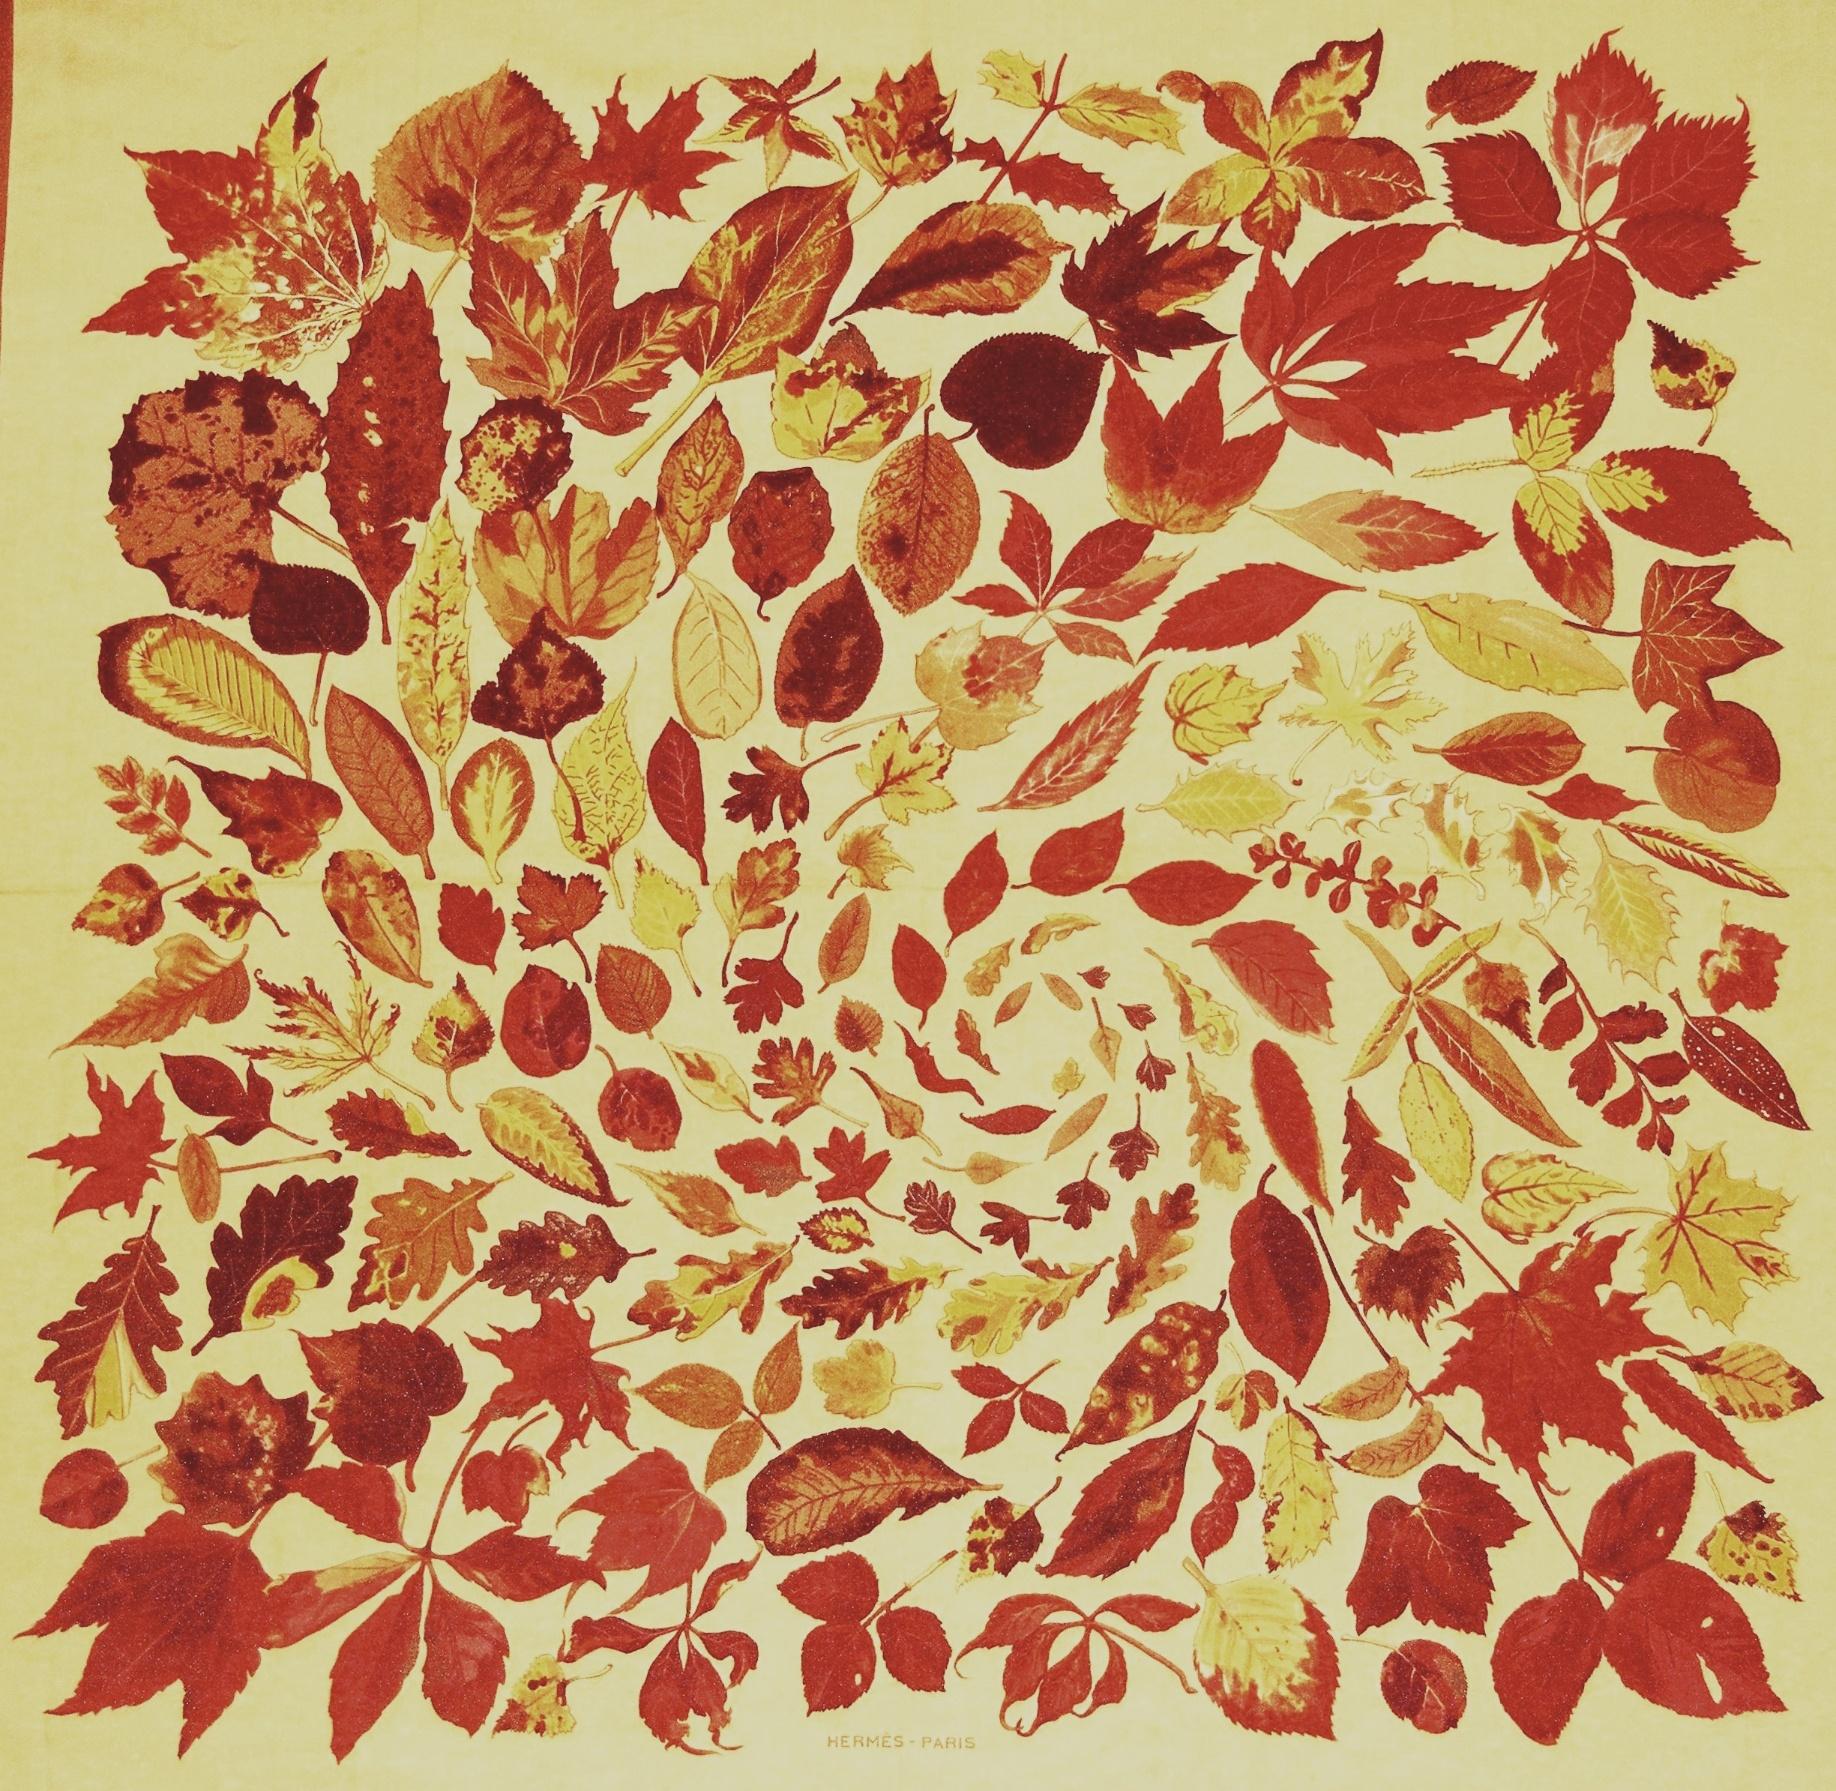 Hermes Tourbillon cashmere and silk large scarf/shawl in the fall orange, green, copper and red colors is the perfect accessory for this season! Created by Christiane Vauzelles for Hermes in 1968 and later reissued, due to its popularity, several